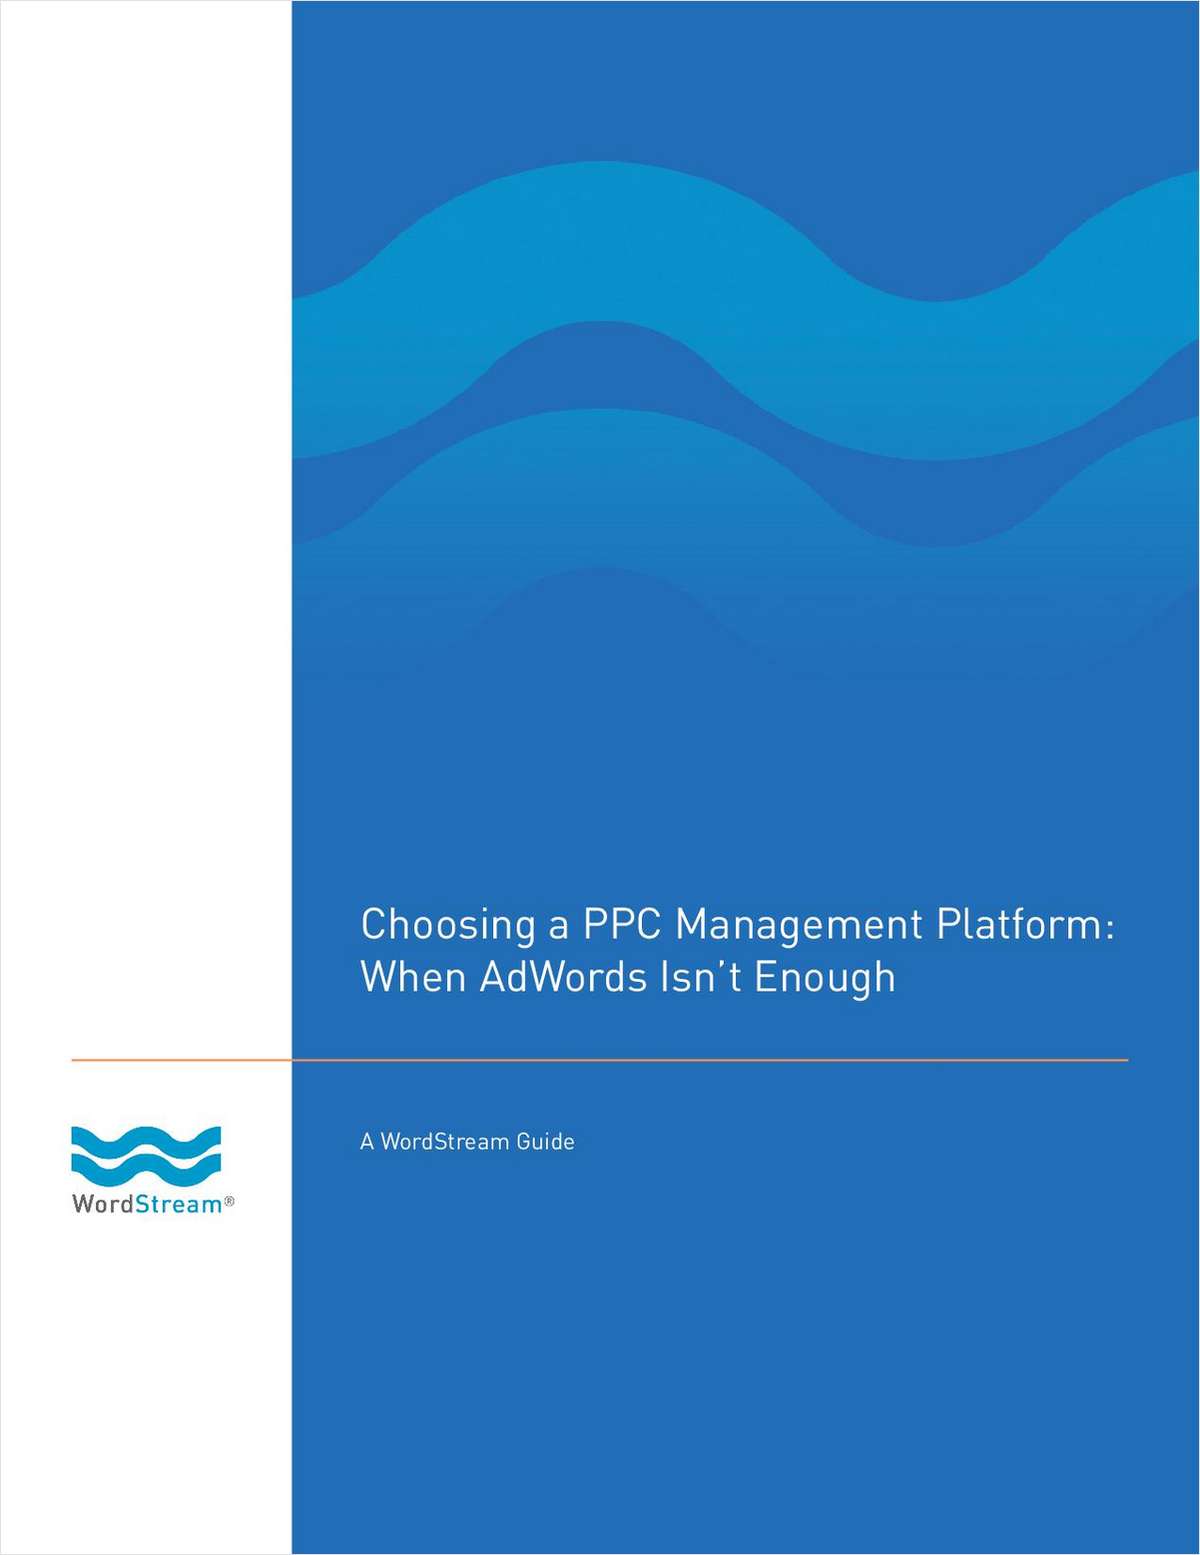 Buyer's Guide & Checklist: When AdWords Isn't Enough - Why & How To Choose PPC Software